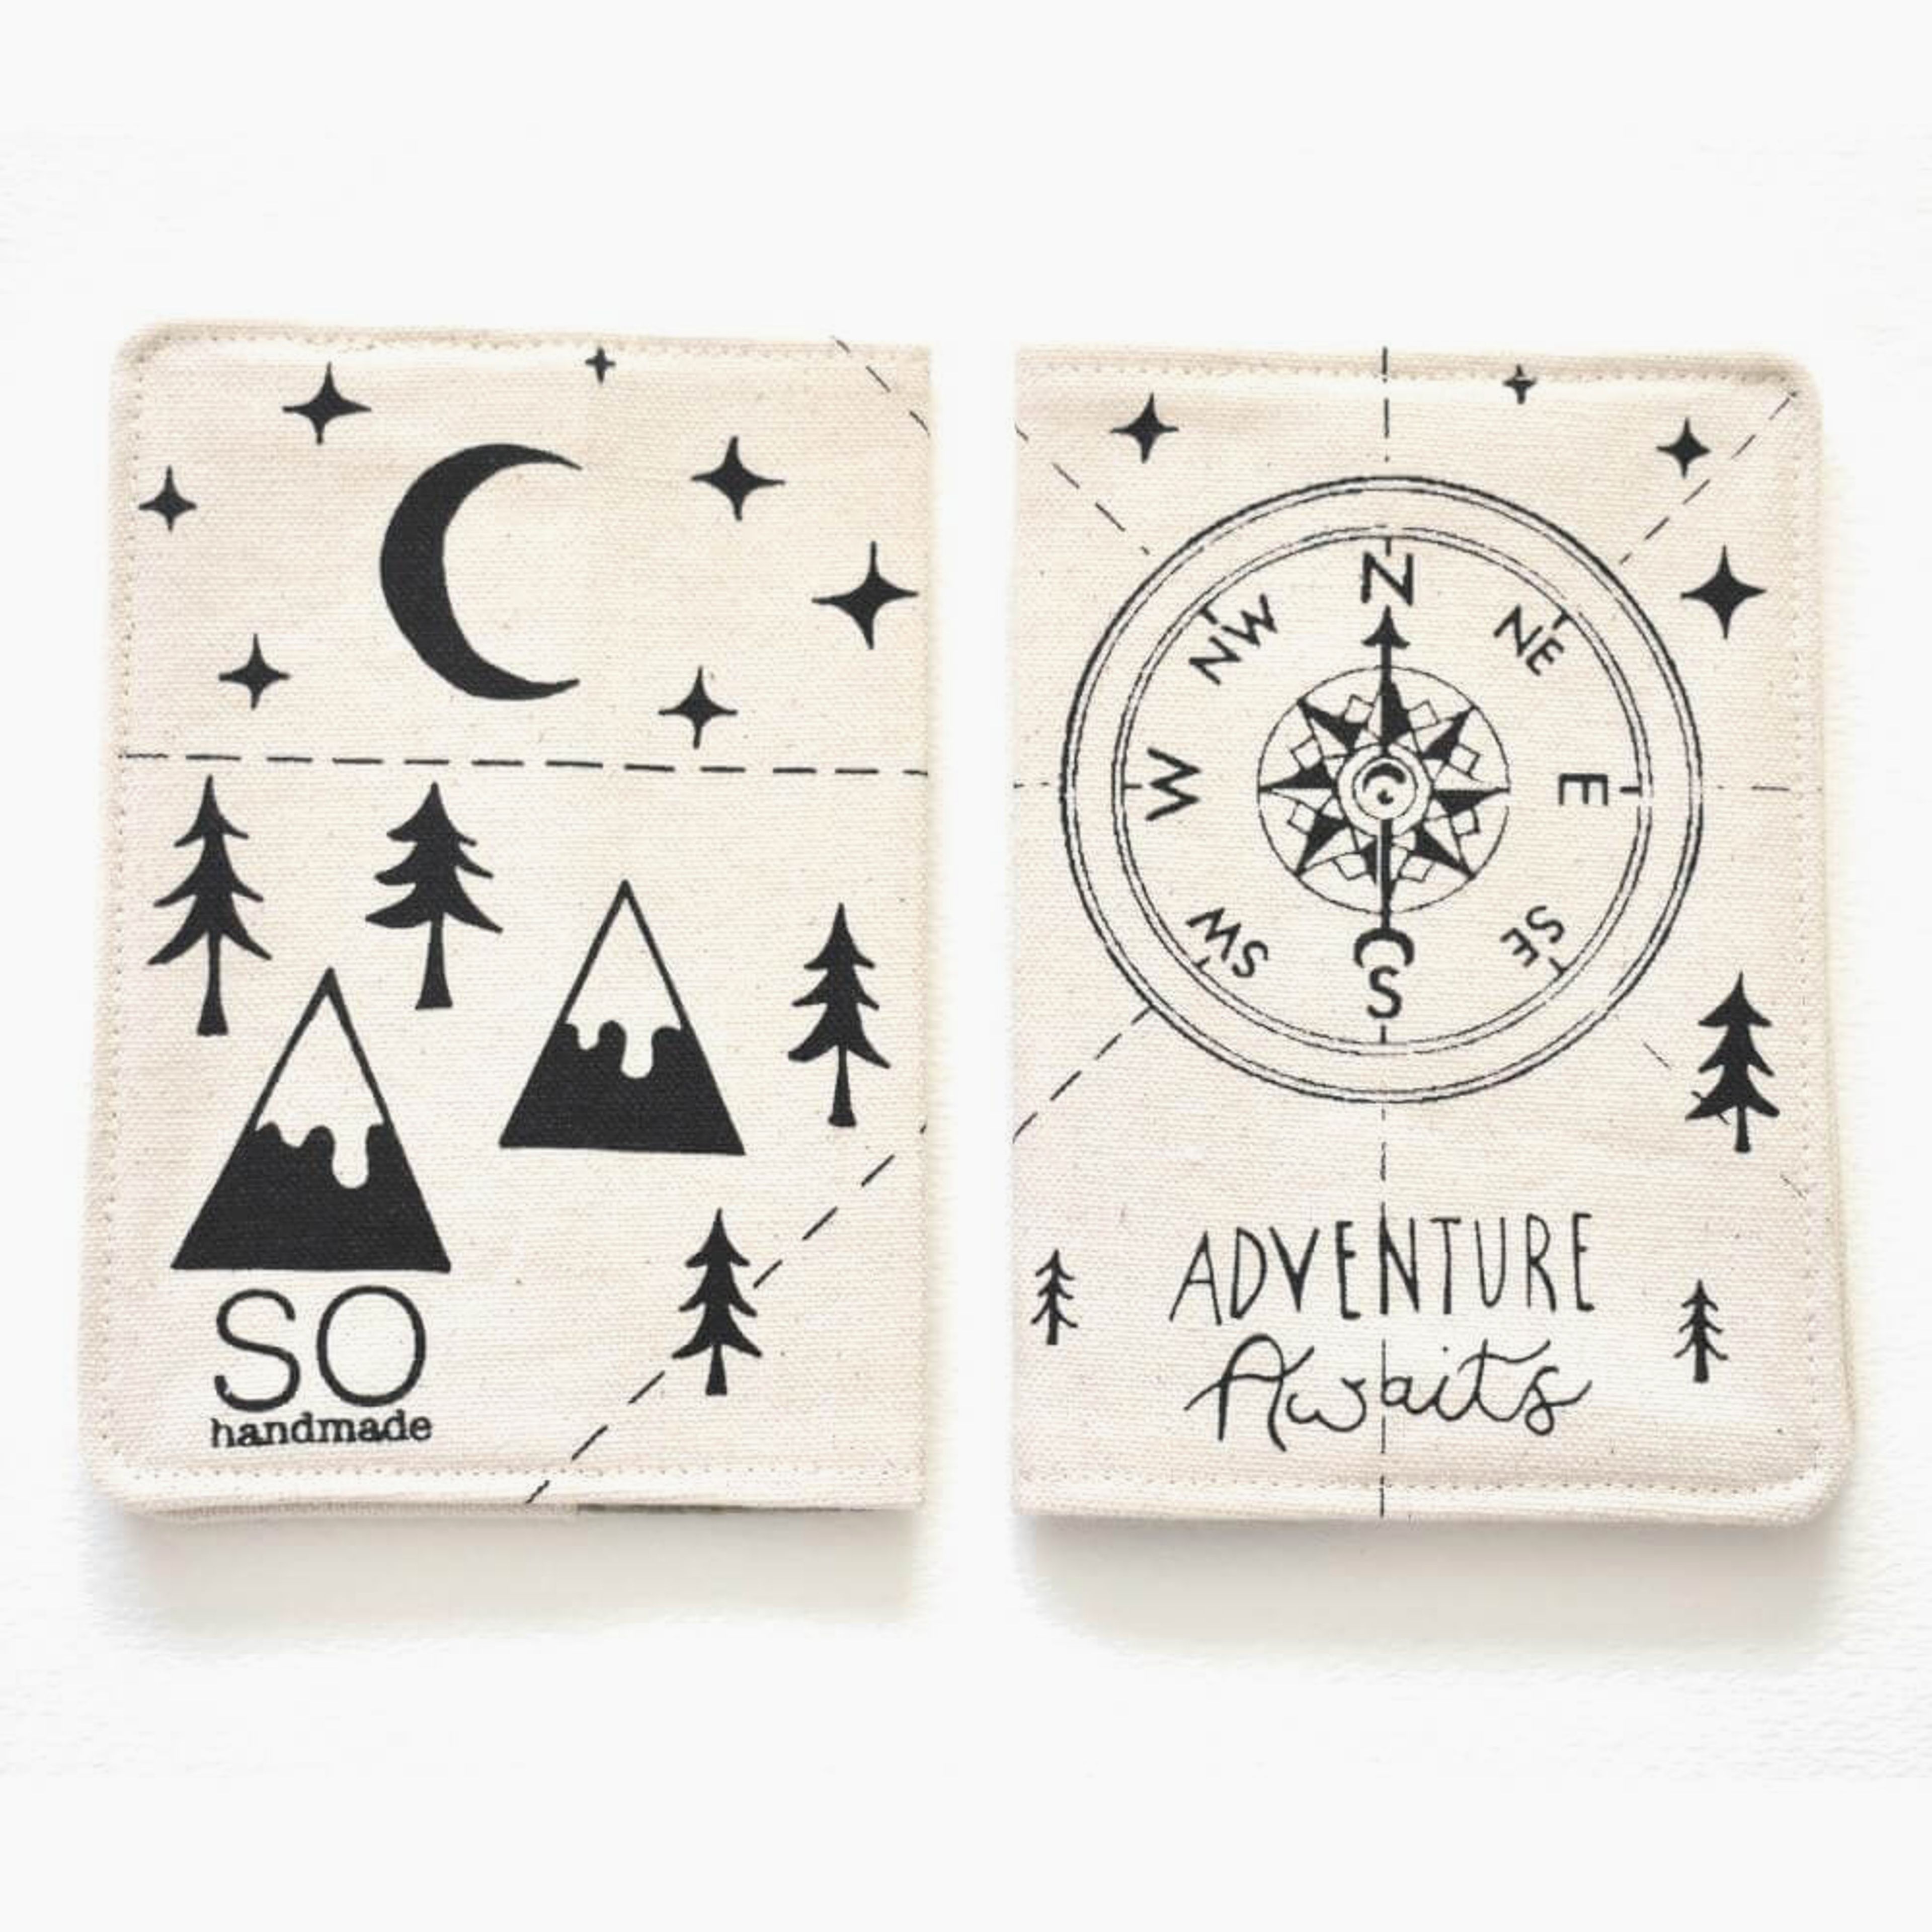 Passport Holder: "The perfect gift for an adventure lover!"